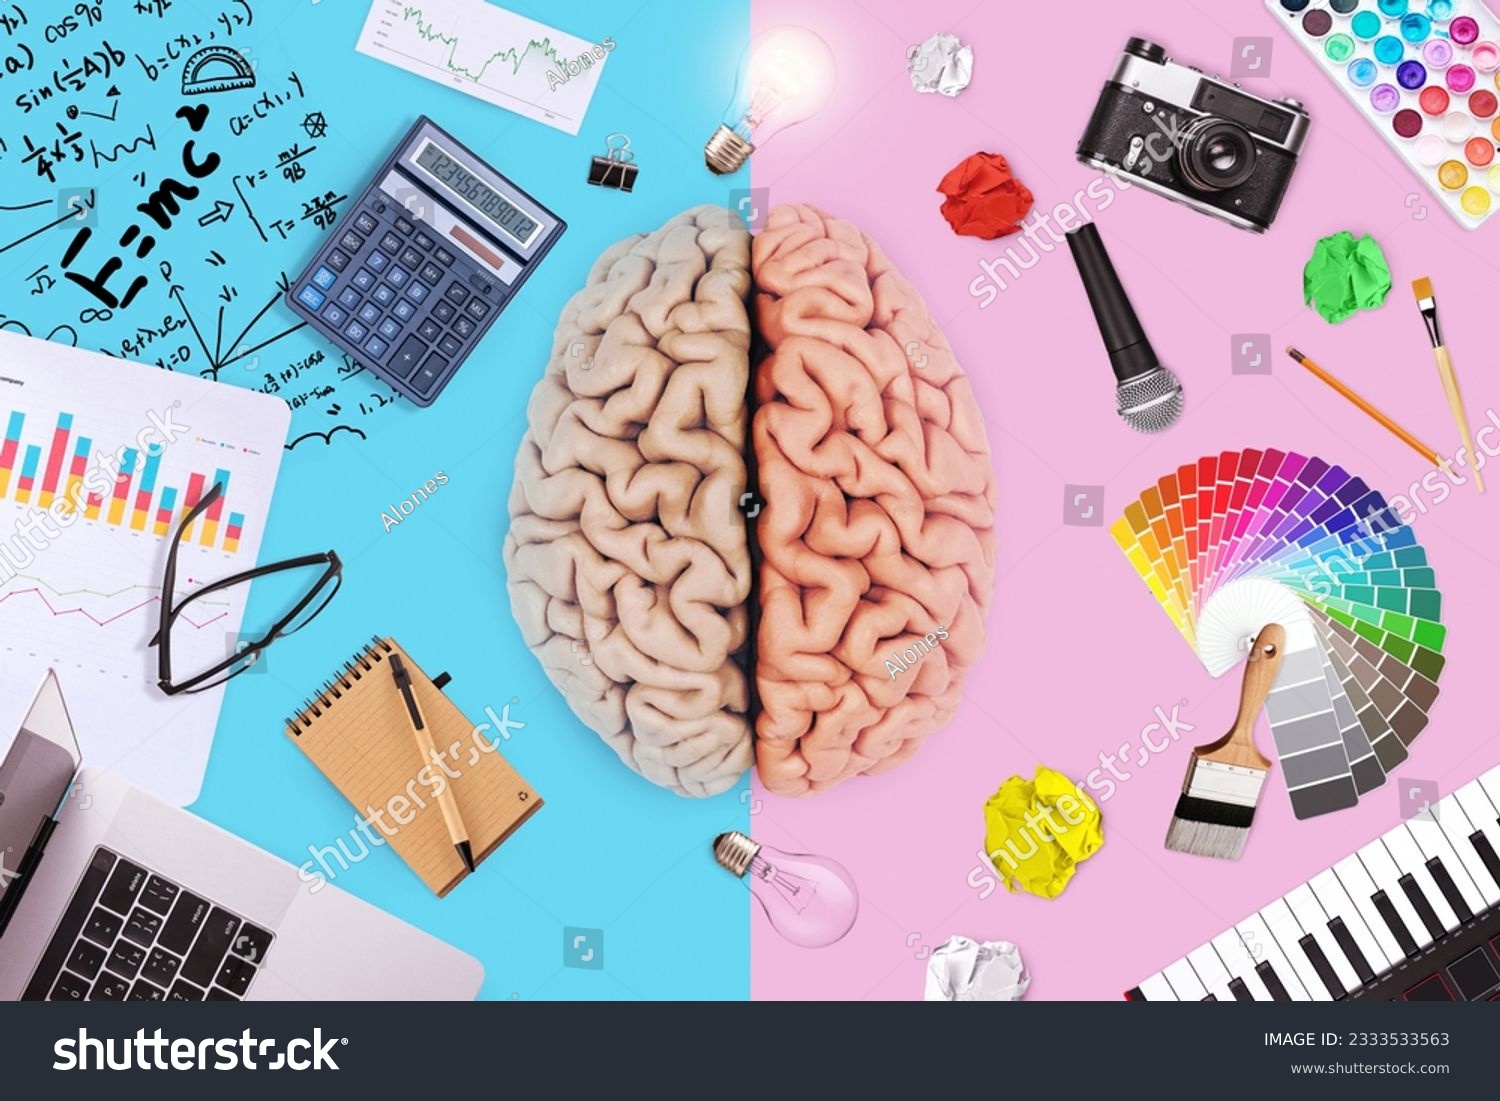 Creative brain with left math business functions and right creative art ability. Logic, mind and skills, creative idea. Teaching choice, concept. School and college. Genius #2333533563